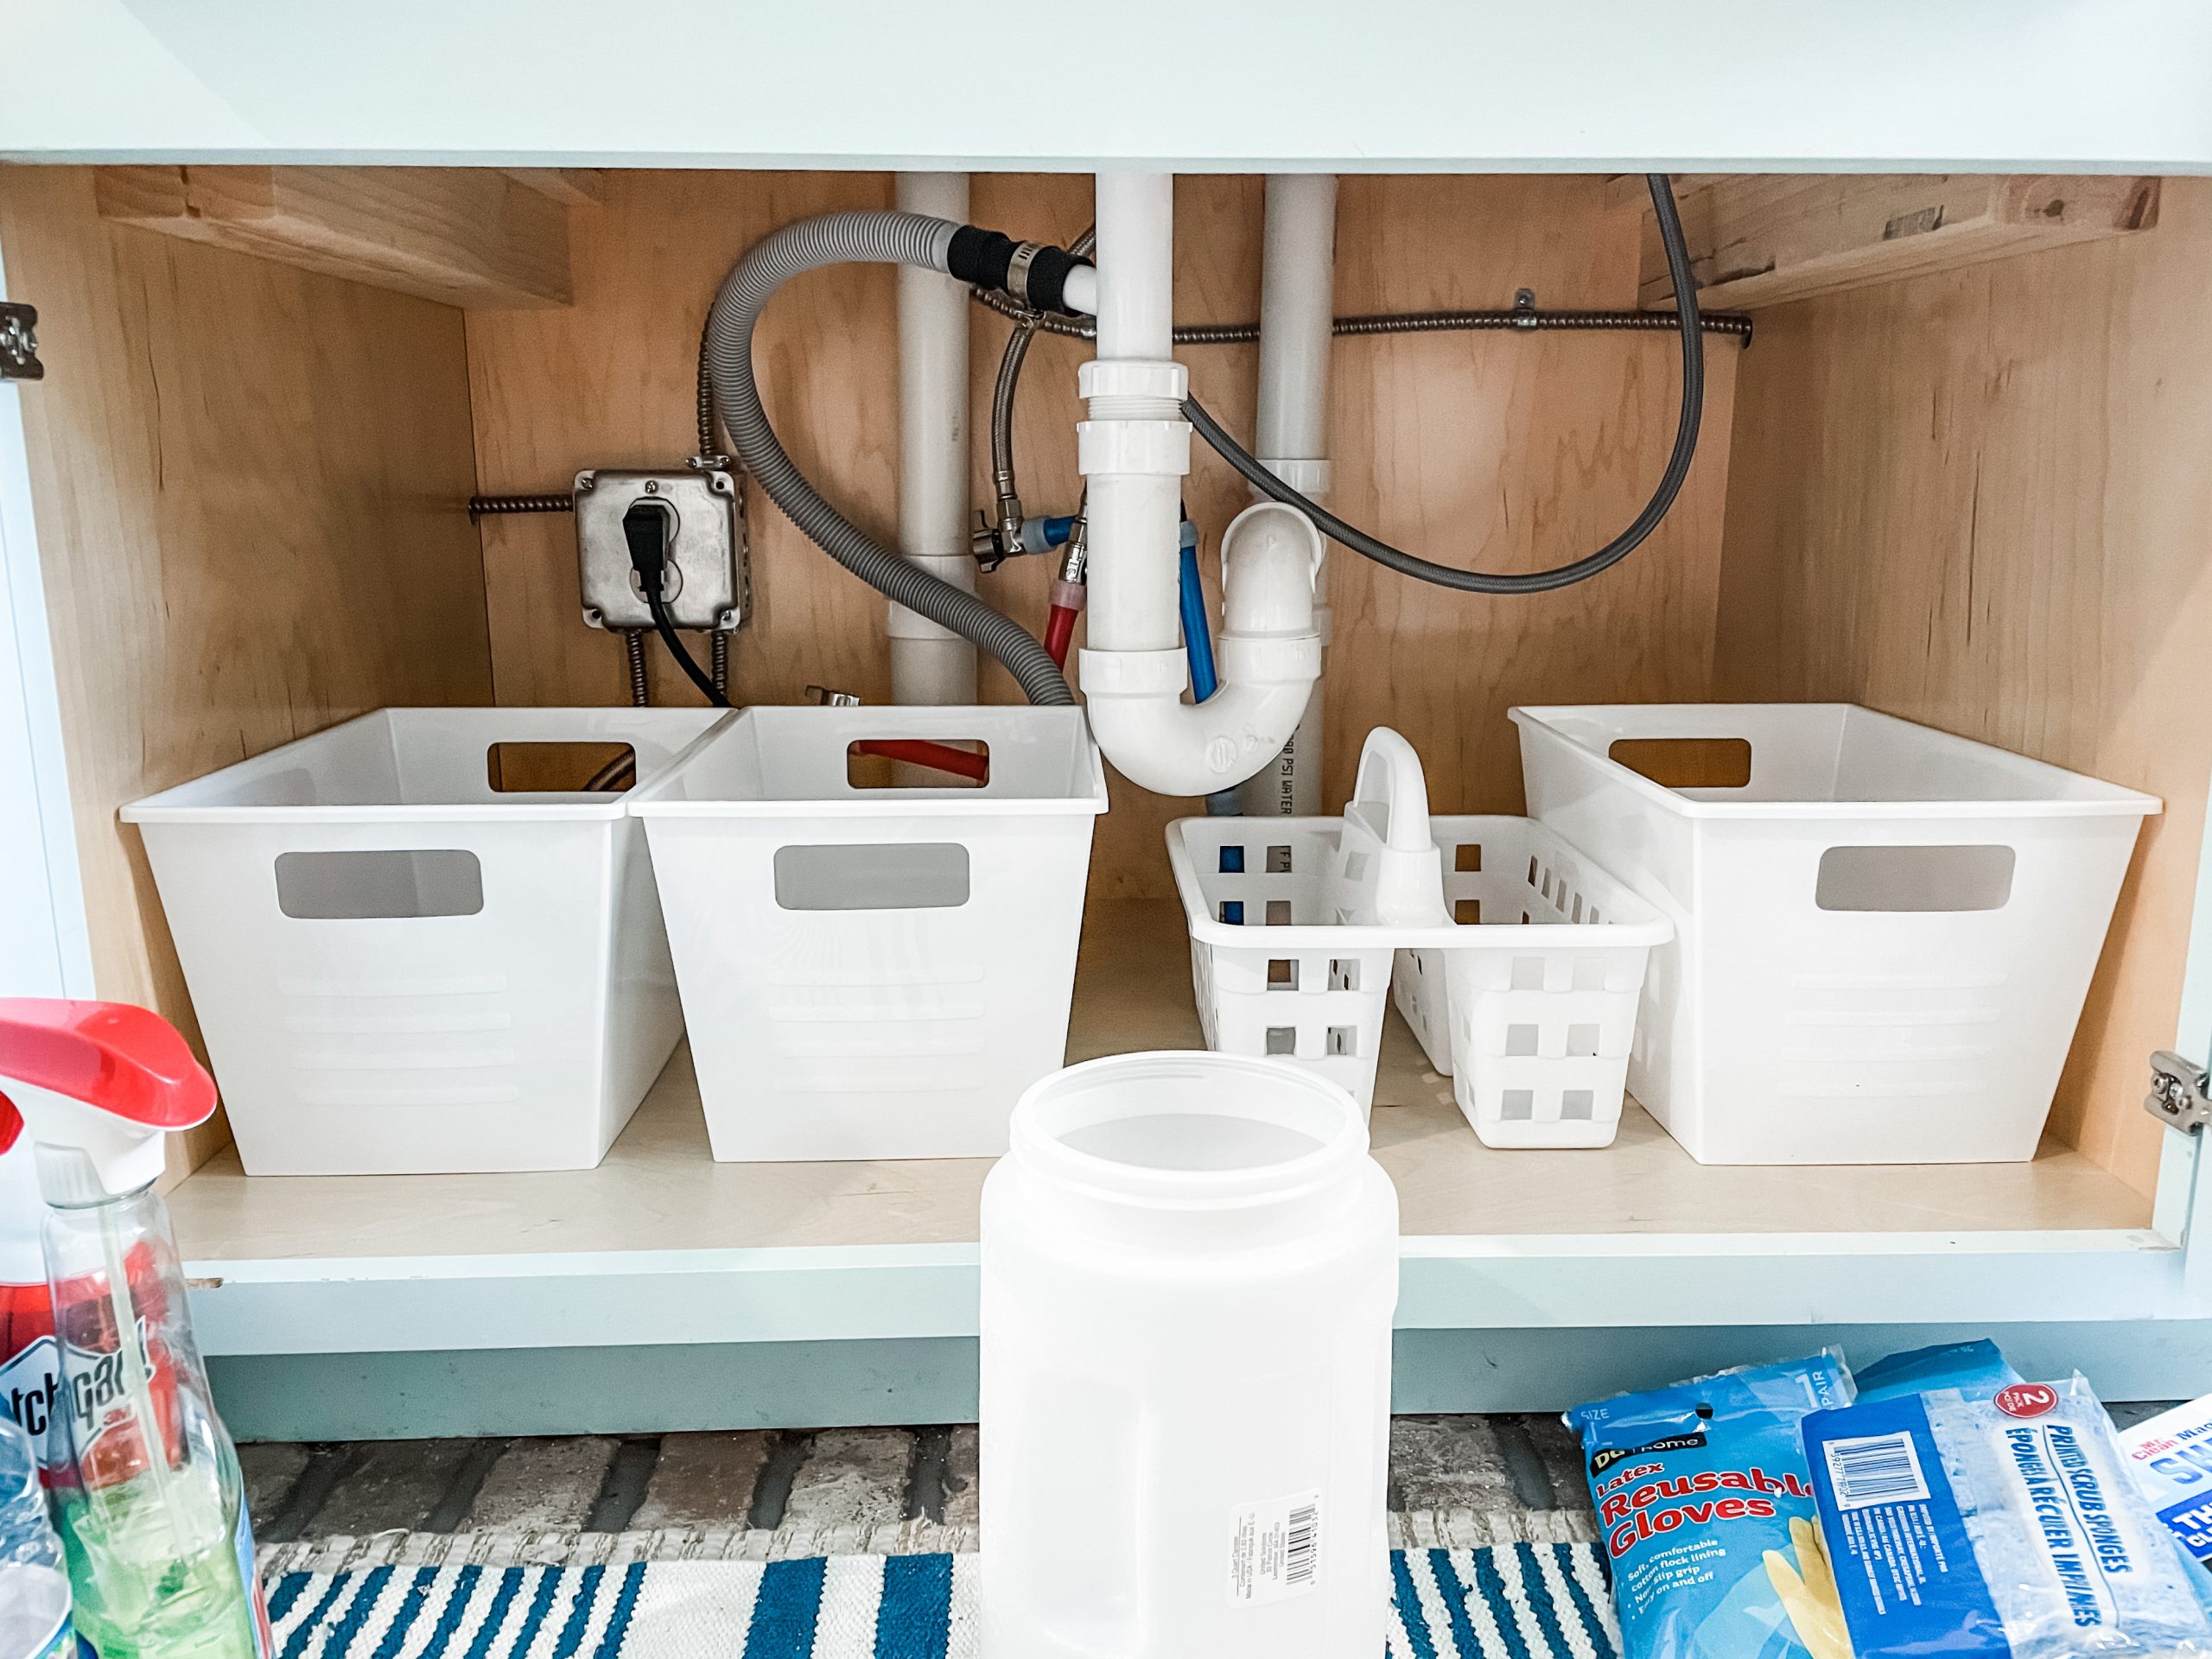 dollar tree under the sink organization - Re-Fabbed